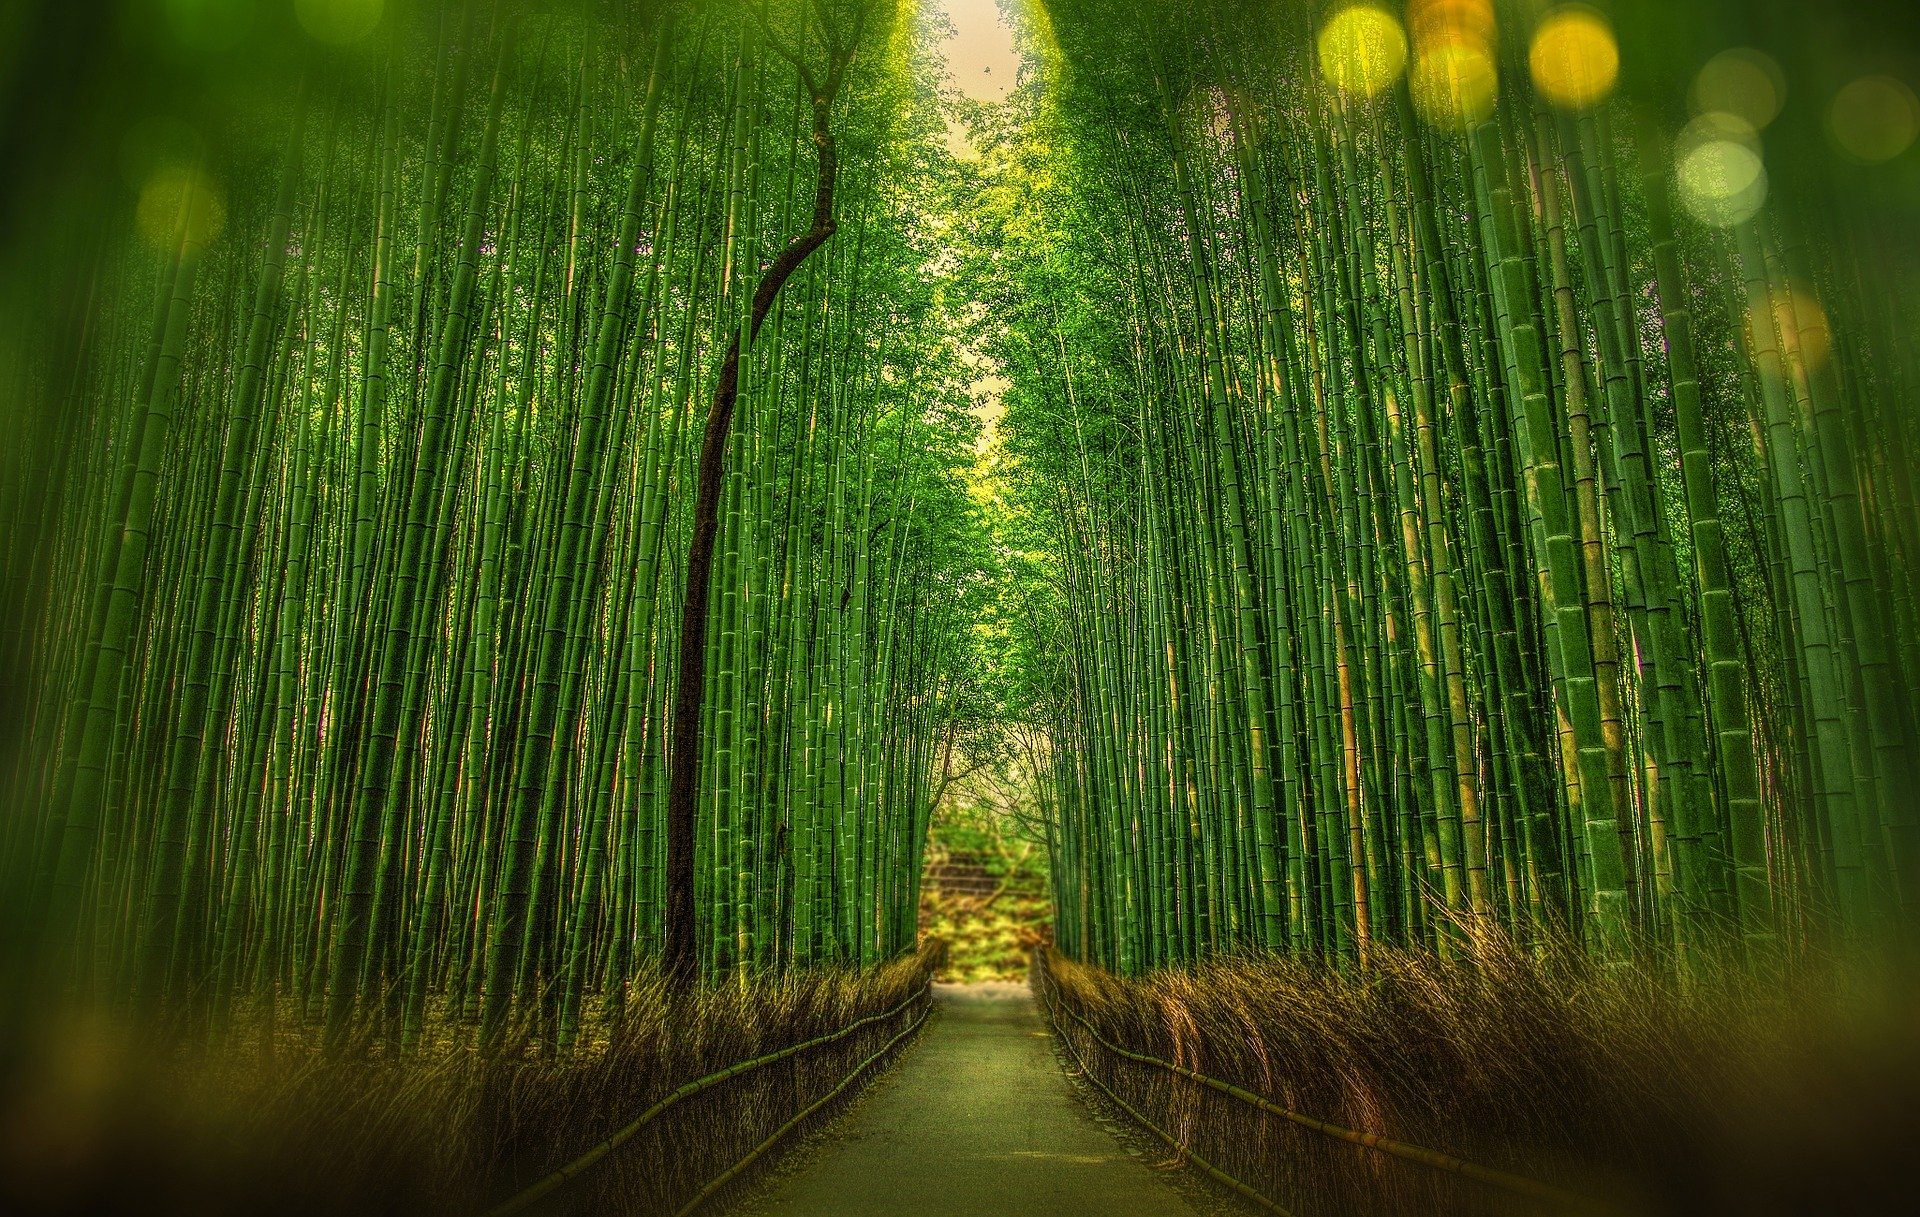 Bamboo Forest, Kyoto, Japan